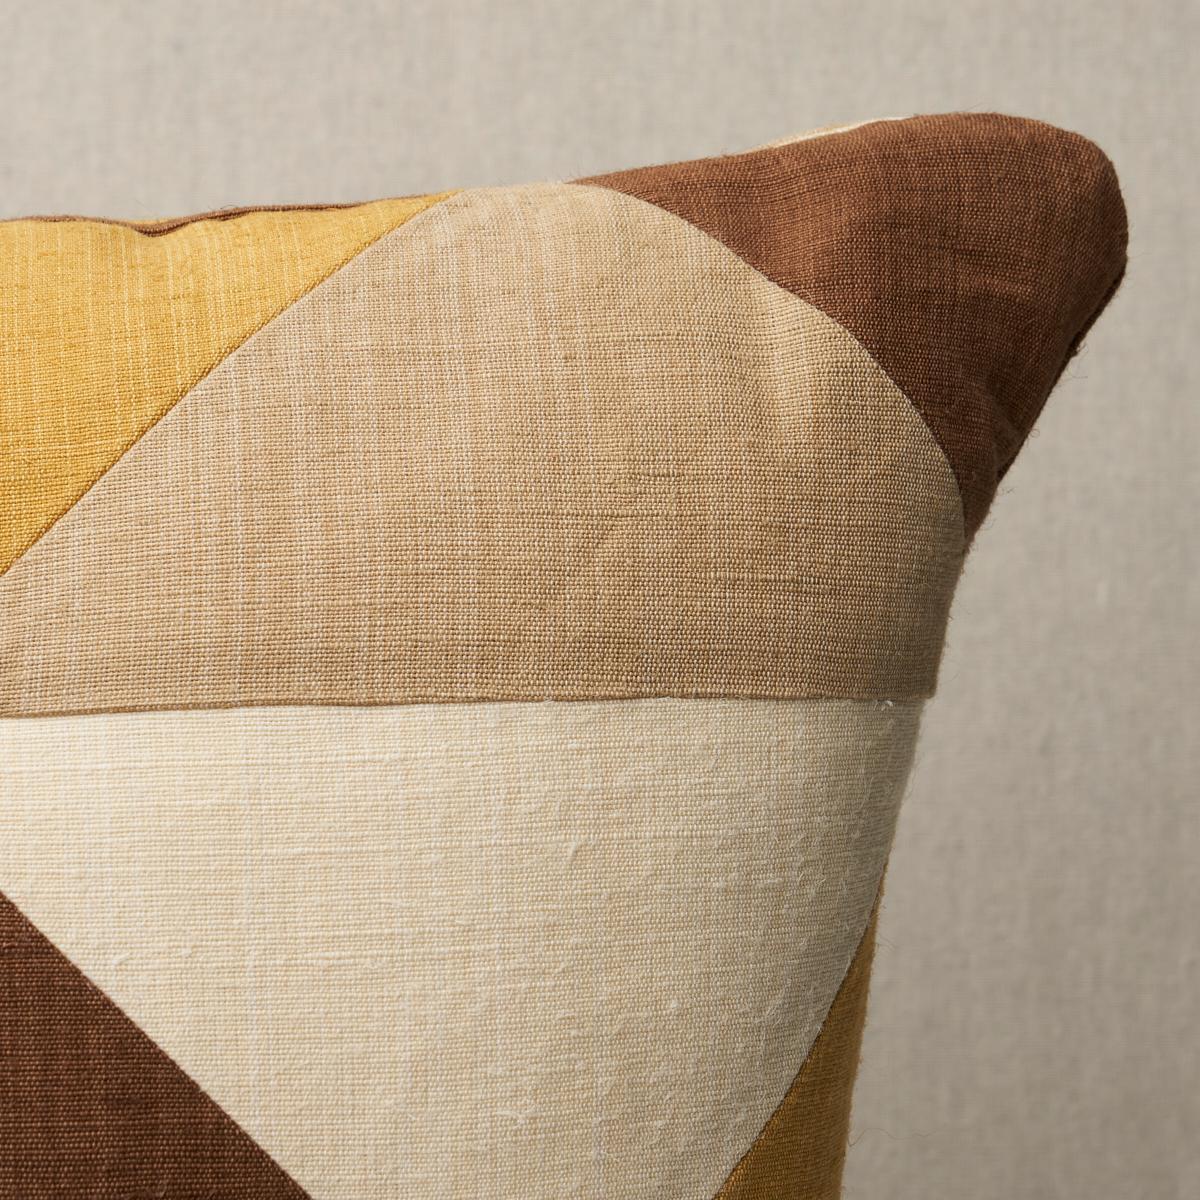 This pillow features Erindale with a knife edge finish. The perfect marriage of modern and rustic, Erindale in spice is a striking patchwork made of hand-dyed cotton-jute. Pillow includes a feather/down fill insert and hidden zipper closure. *If out